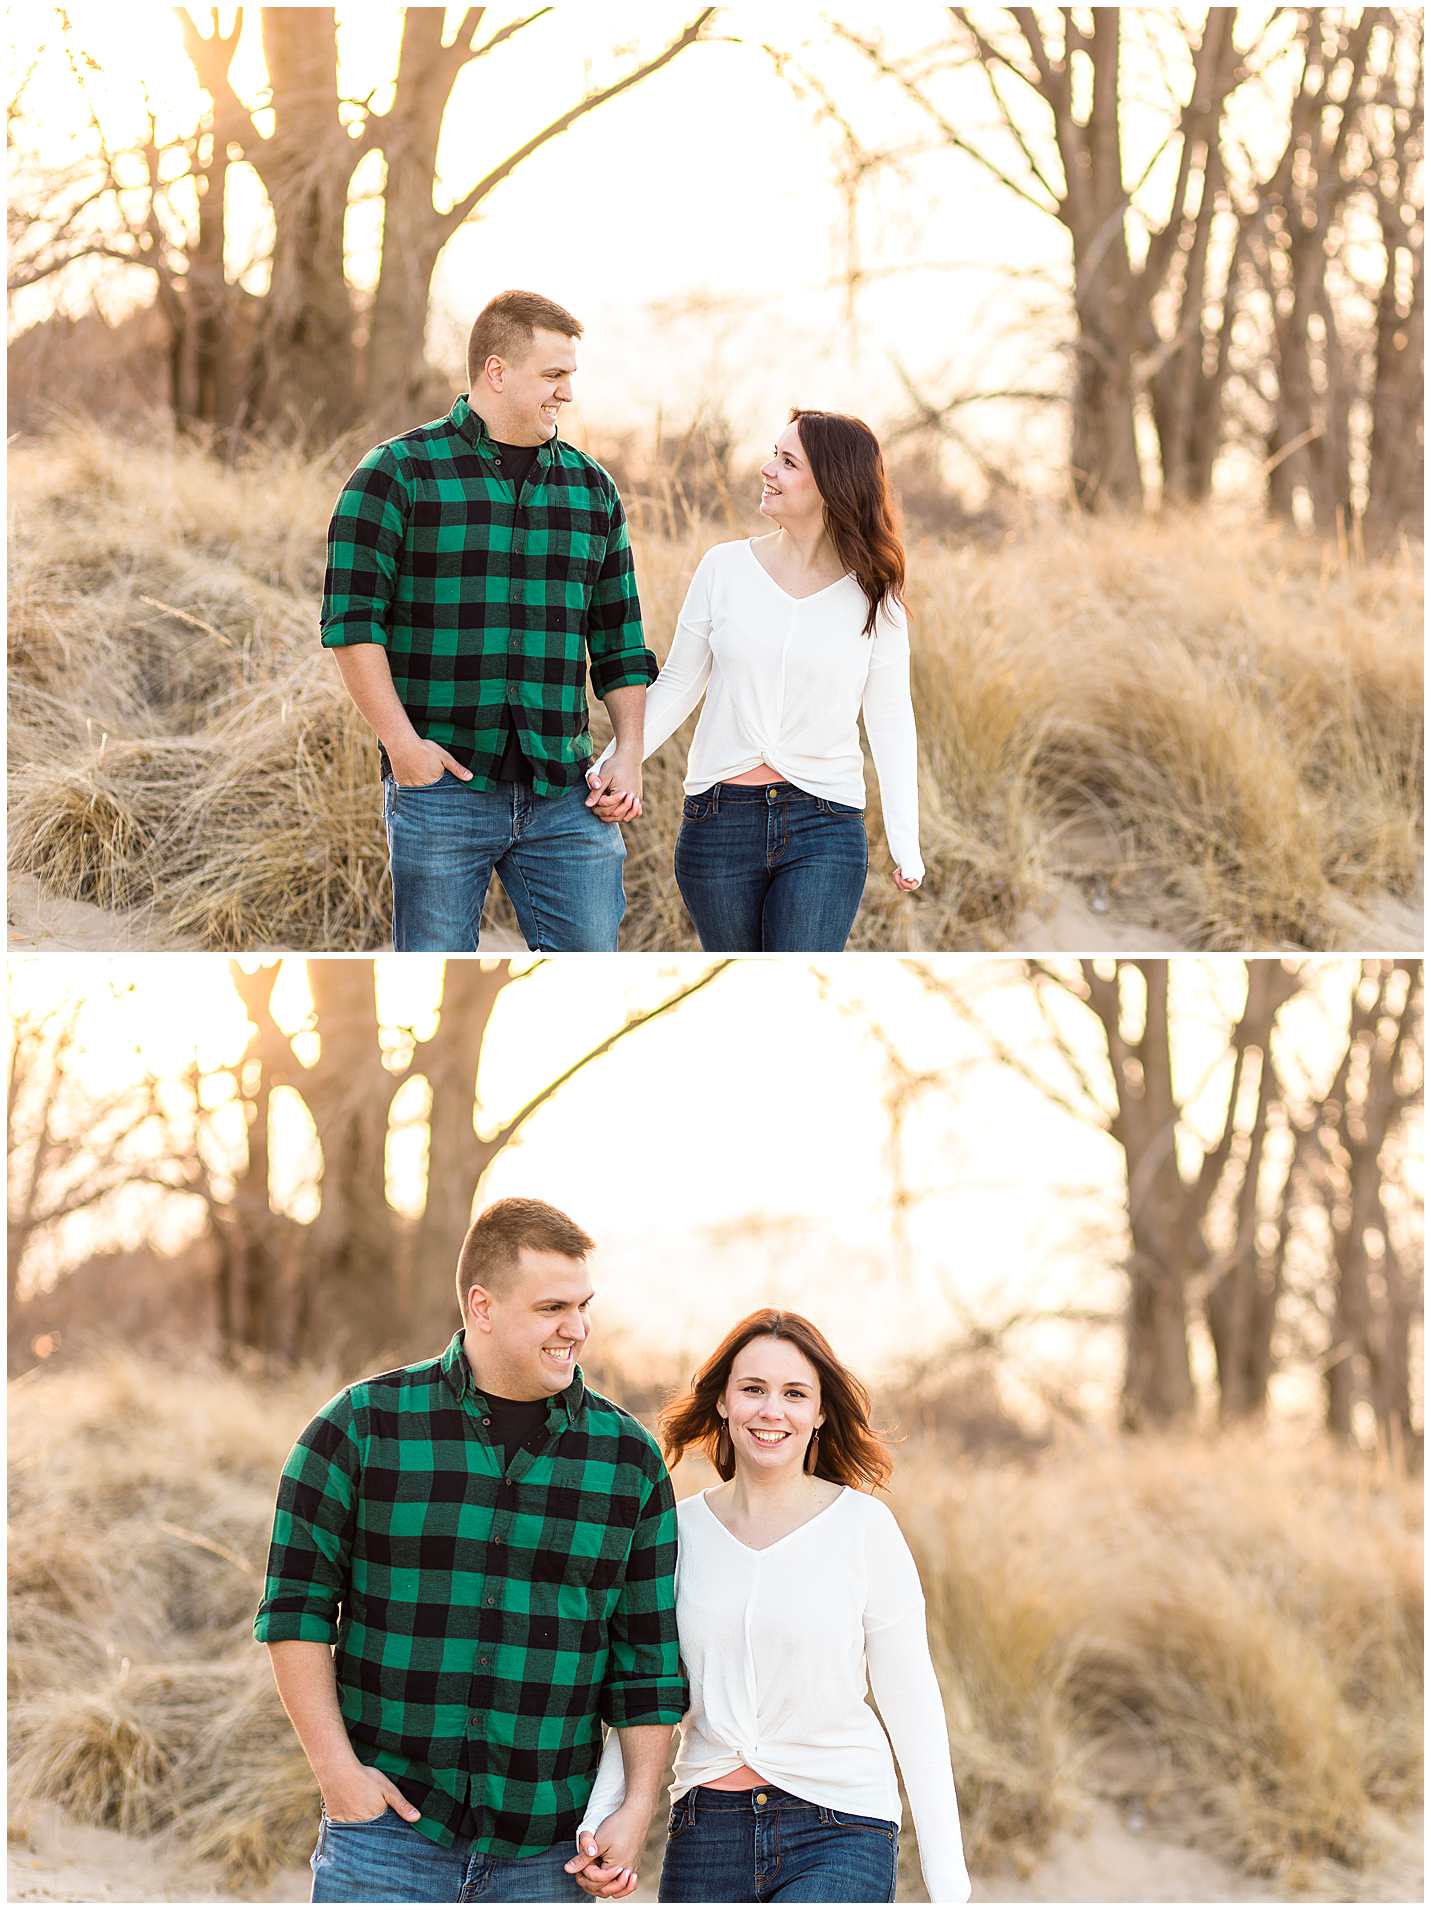 Gillson-Beach-Engagement-Best-Wedding-Photographers-In-Illinois-Spring-Engagement-Photos-Outfits